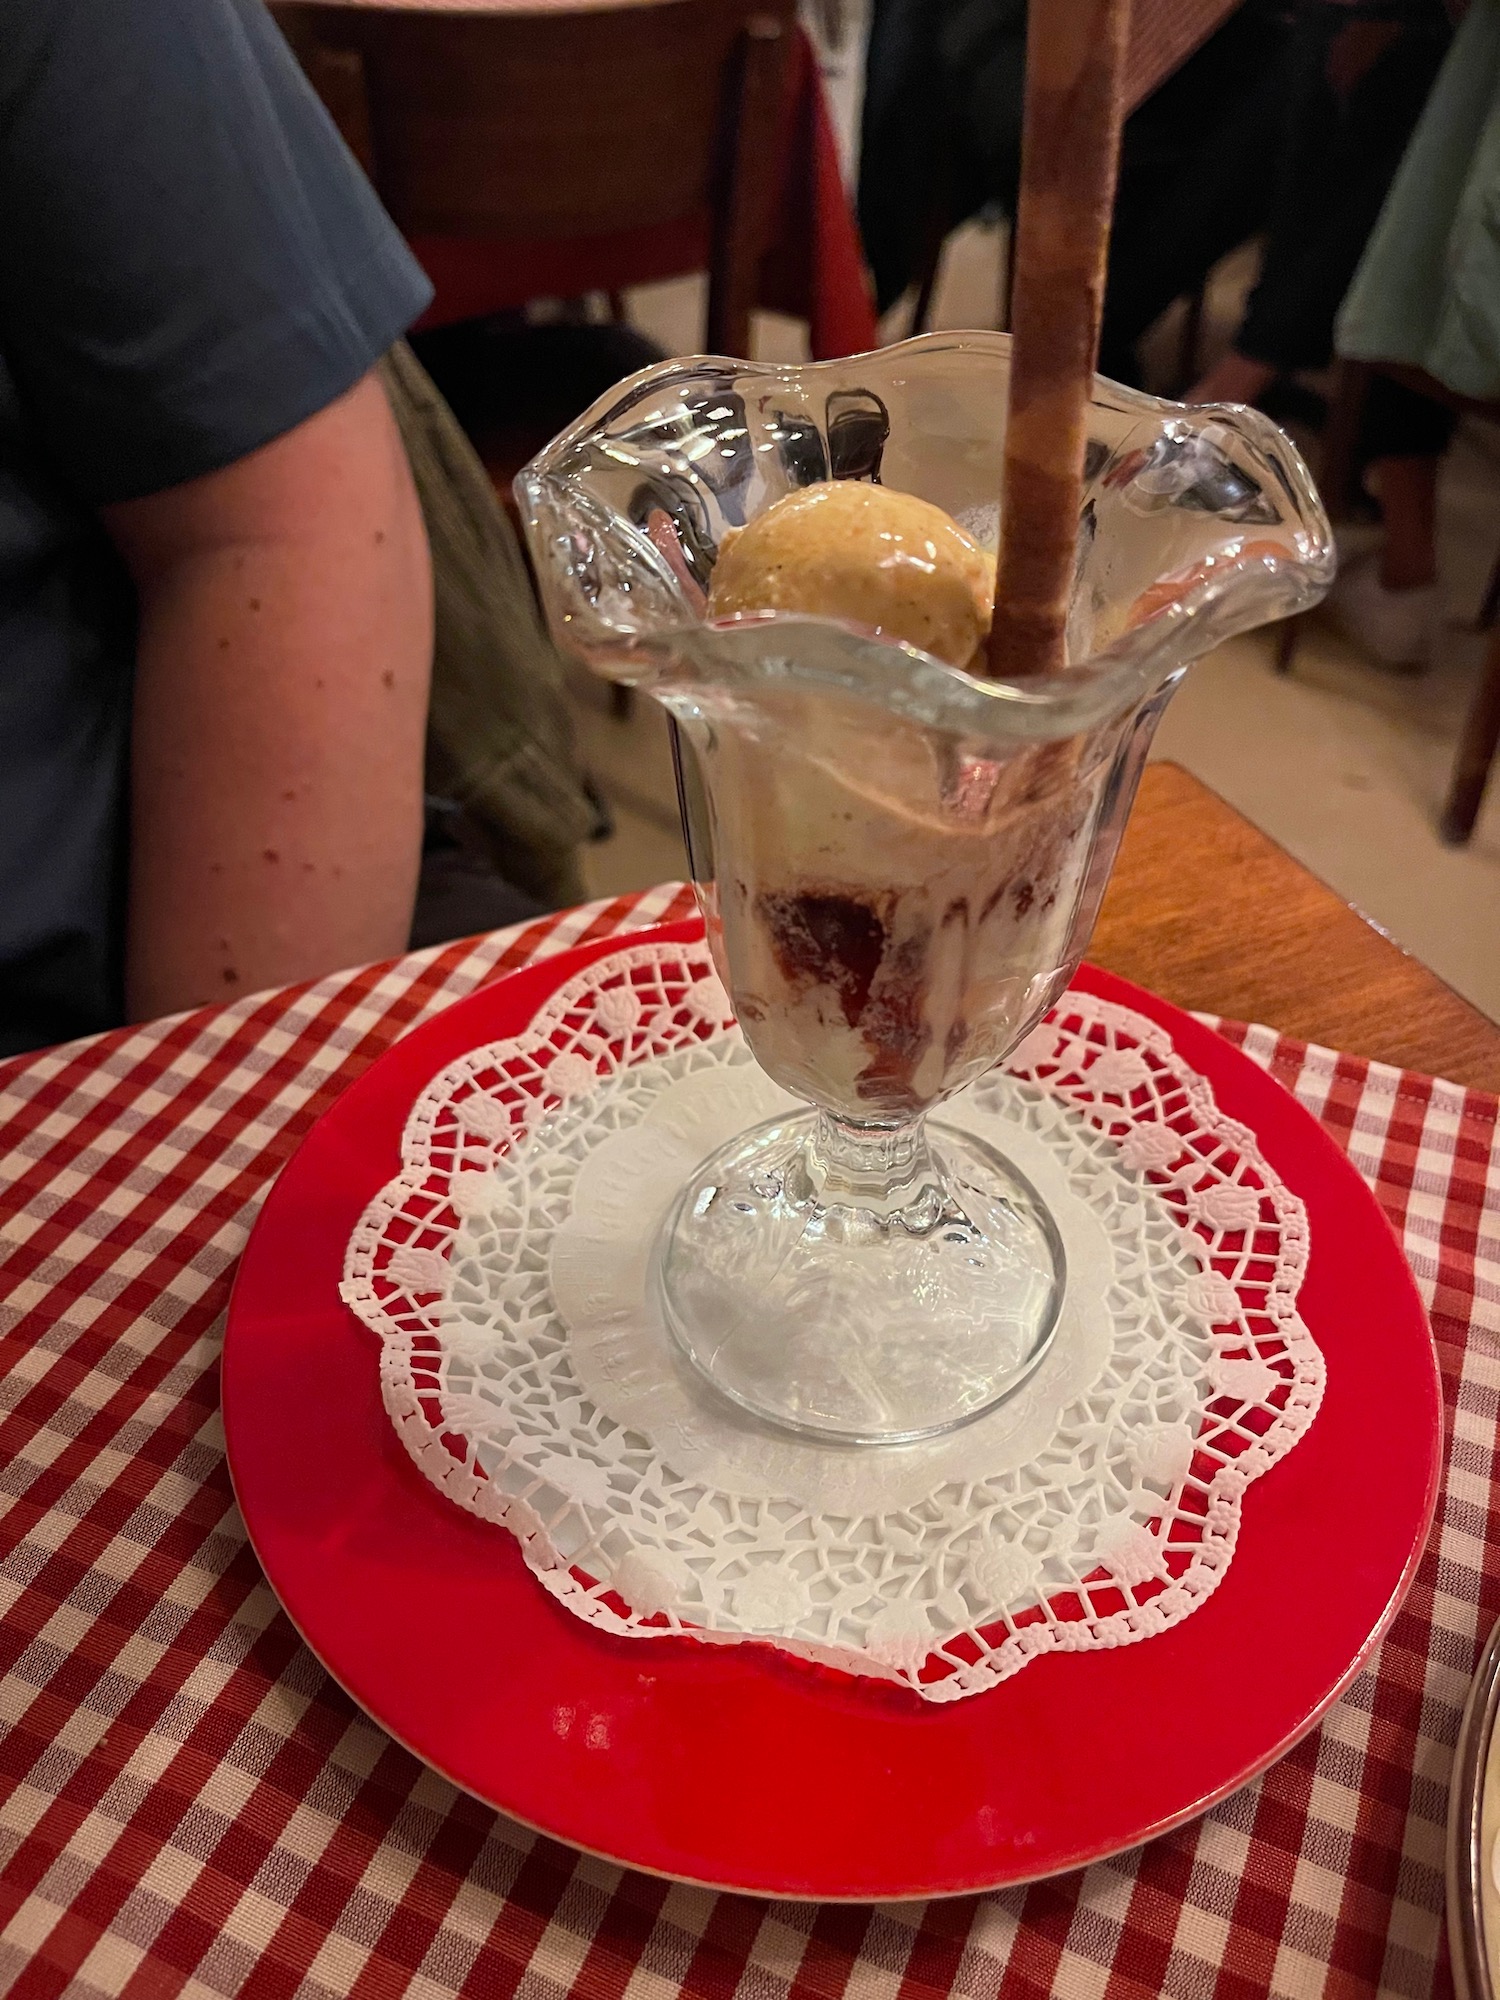 a glass cup with ice cream in it